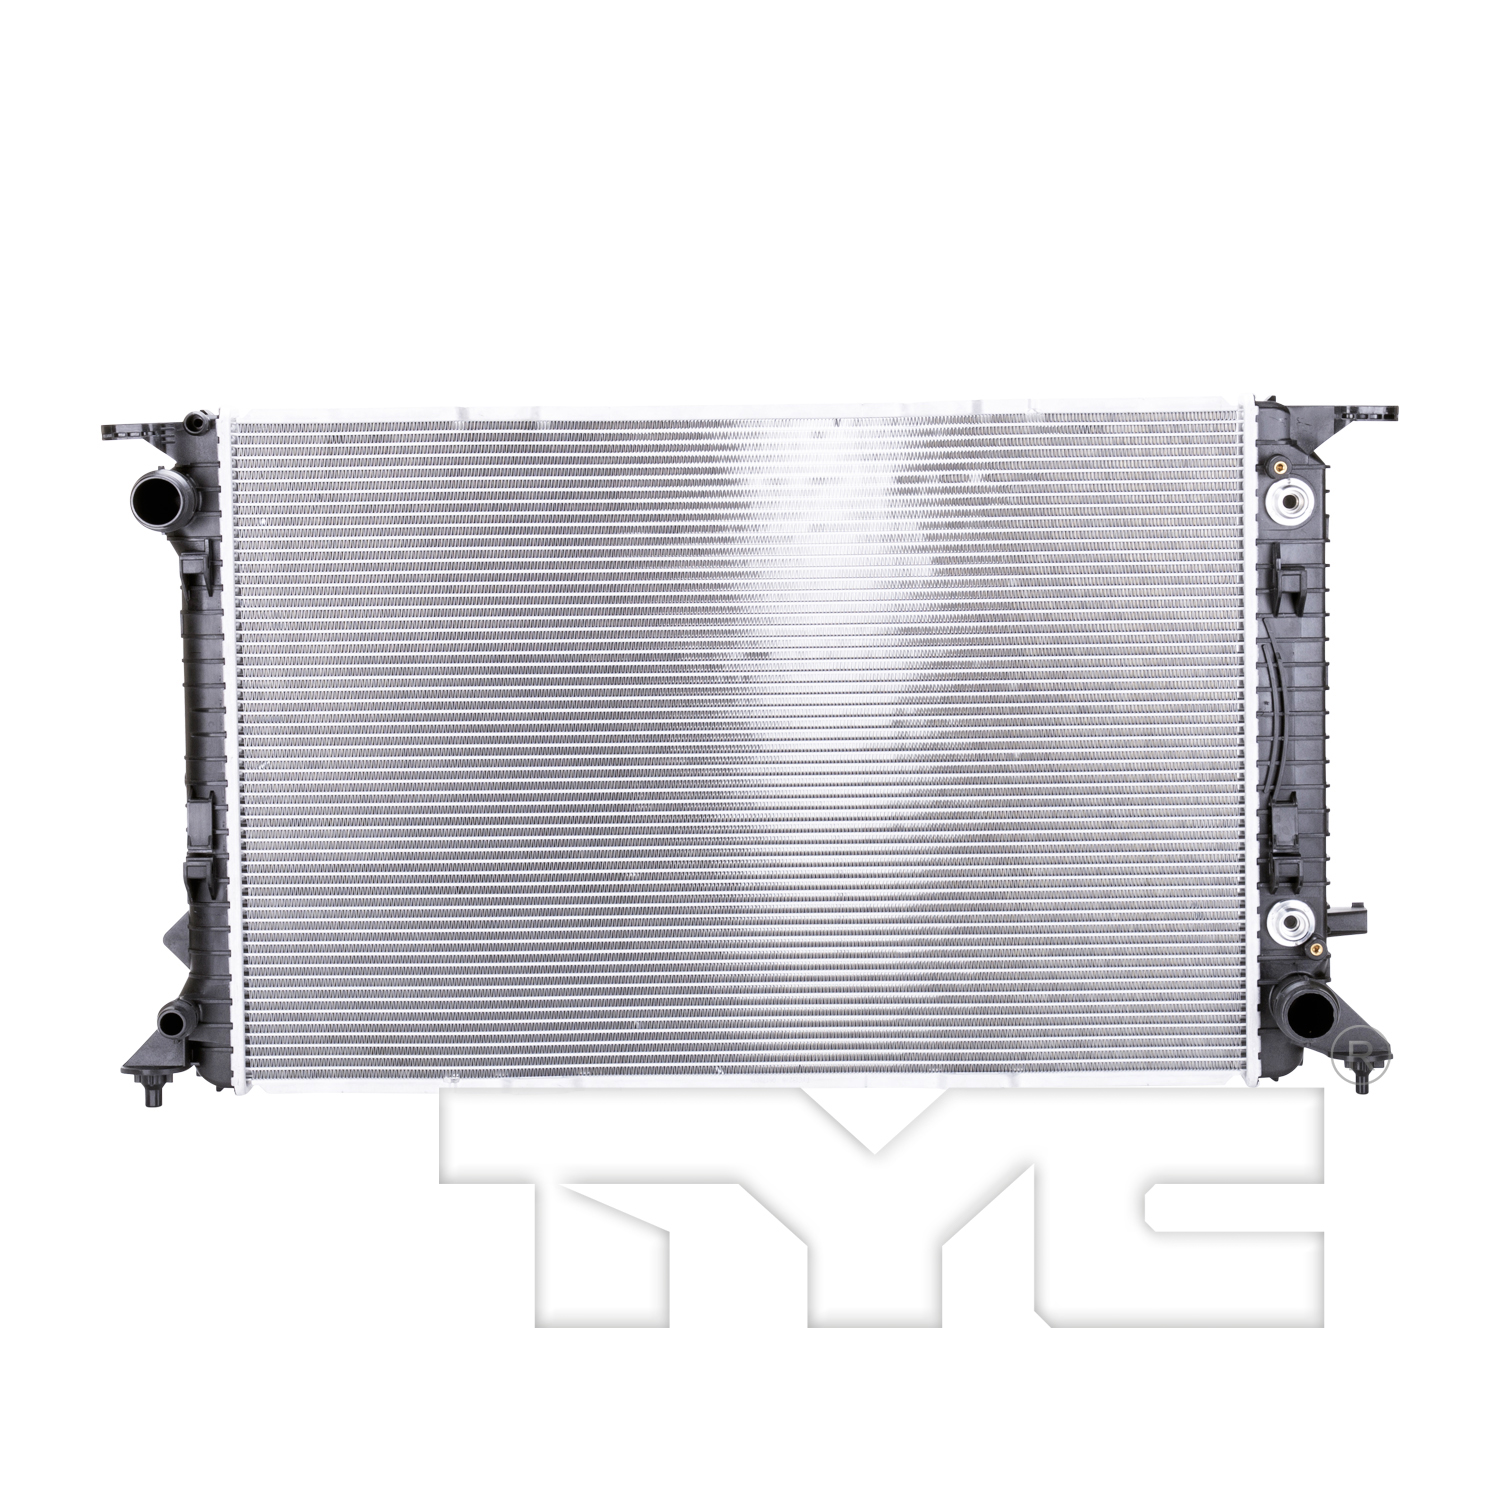 Aftermarket RADIATORS for AUDI - A5 QUATTRO, A5 QUATTRO,08-17,Radiator assembly